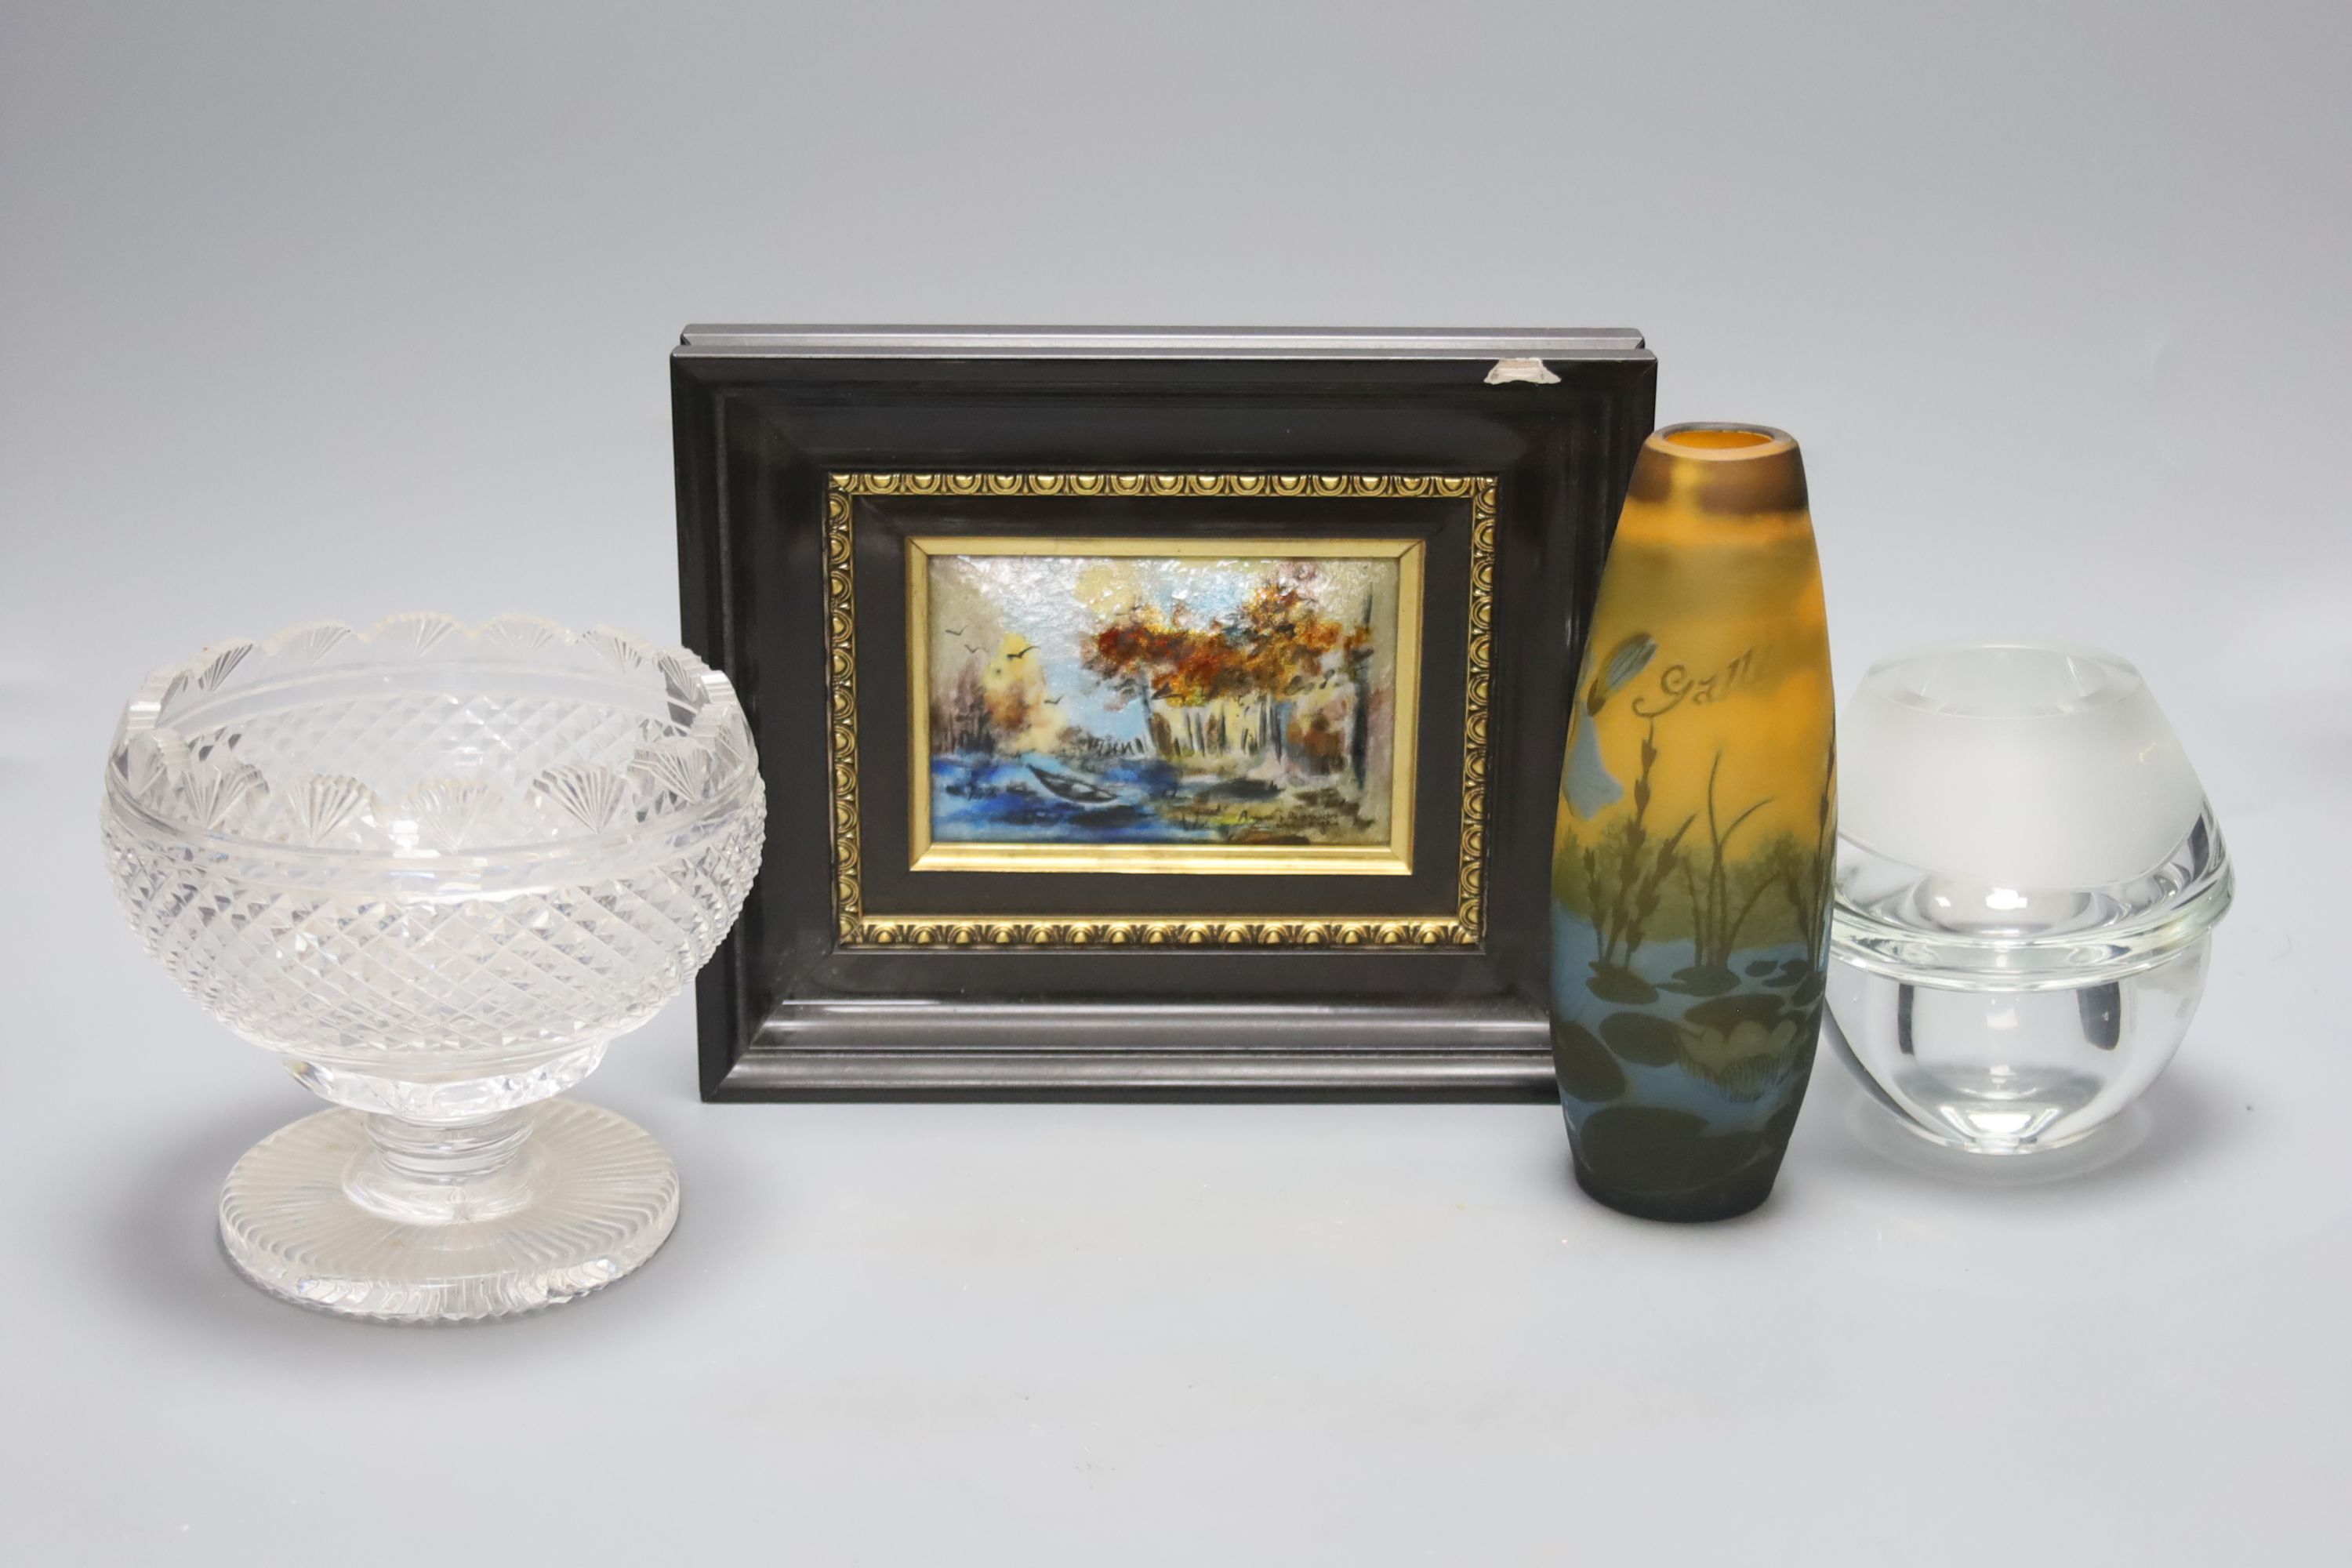 A framed Limoges enamel plaque, a Galle style cameo glass vase and two items of clear glass